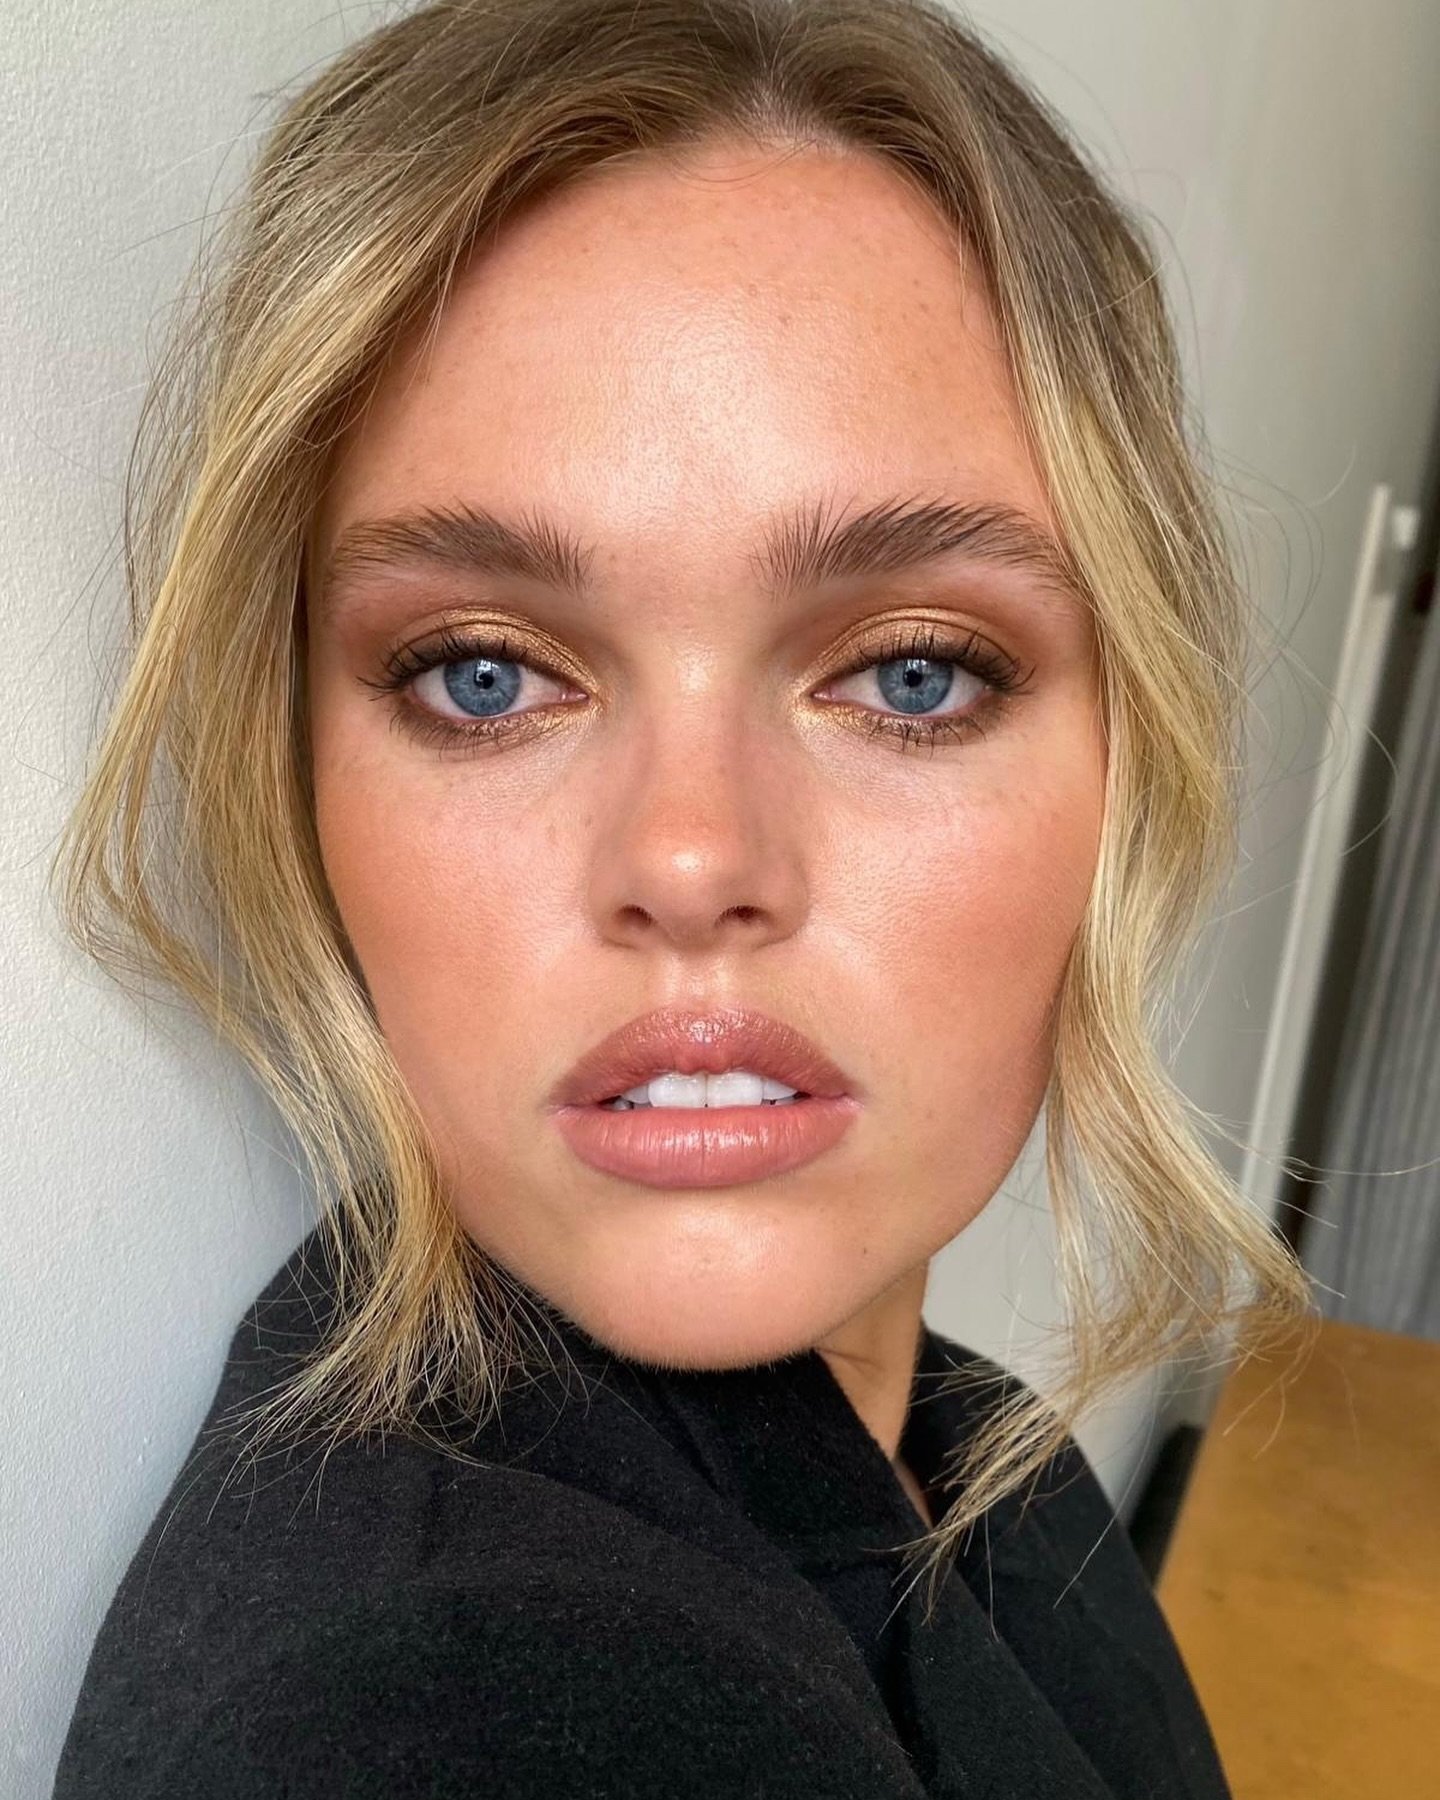 Disco gold for the win ✨ @bellagard @pridemodels 

Product breakdown:
Hair - @oribe Tres Set Structure Spray &amp; 
Swept Up Volume Powder Spray

Face:
Skin Prep - @rationale #2 The Light Creme
Foundation- @armanibeauty Luminous silk
Concealer @kosas